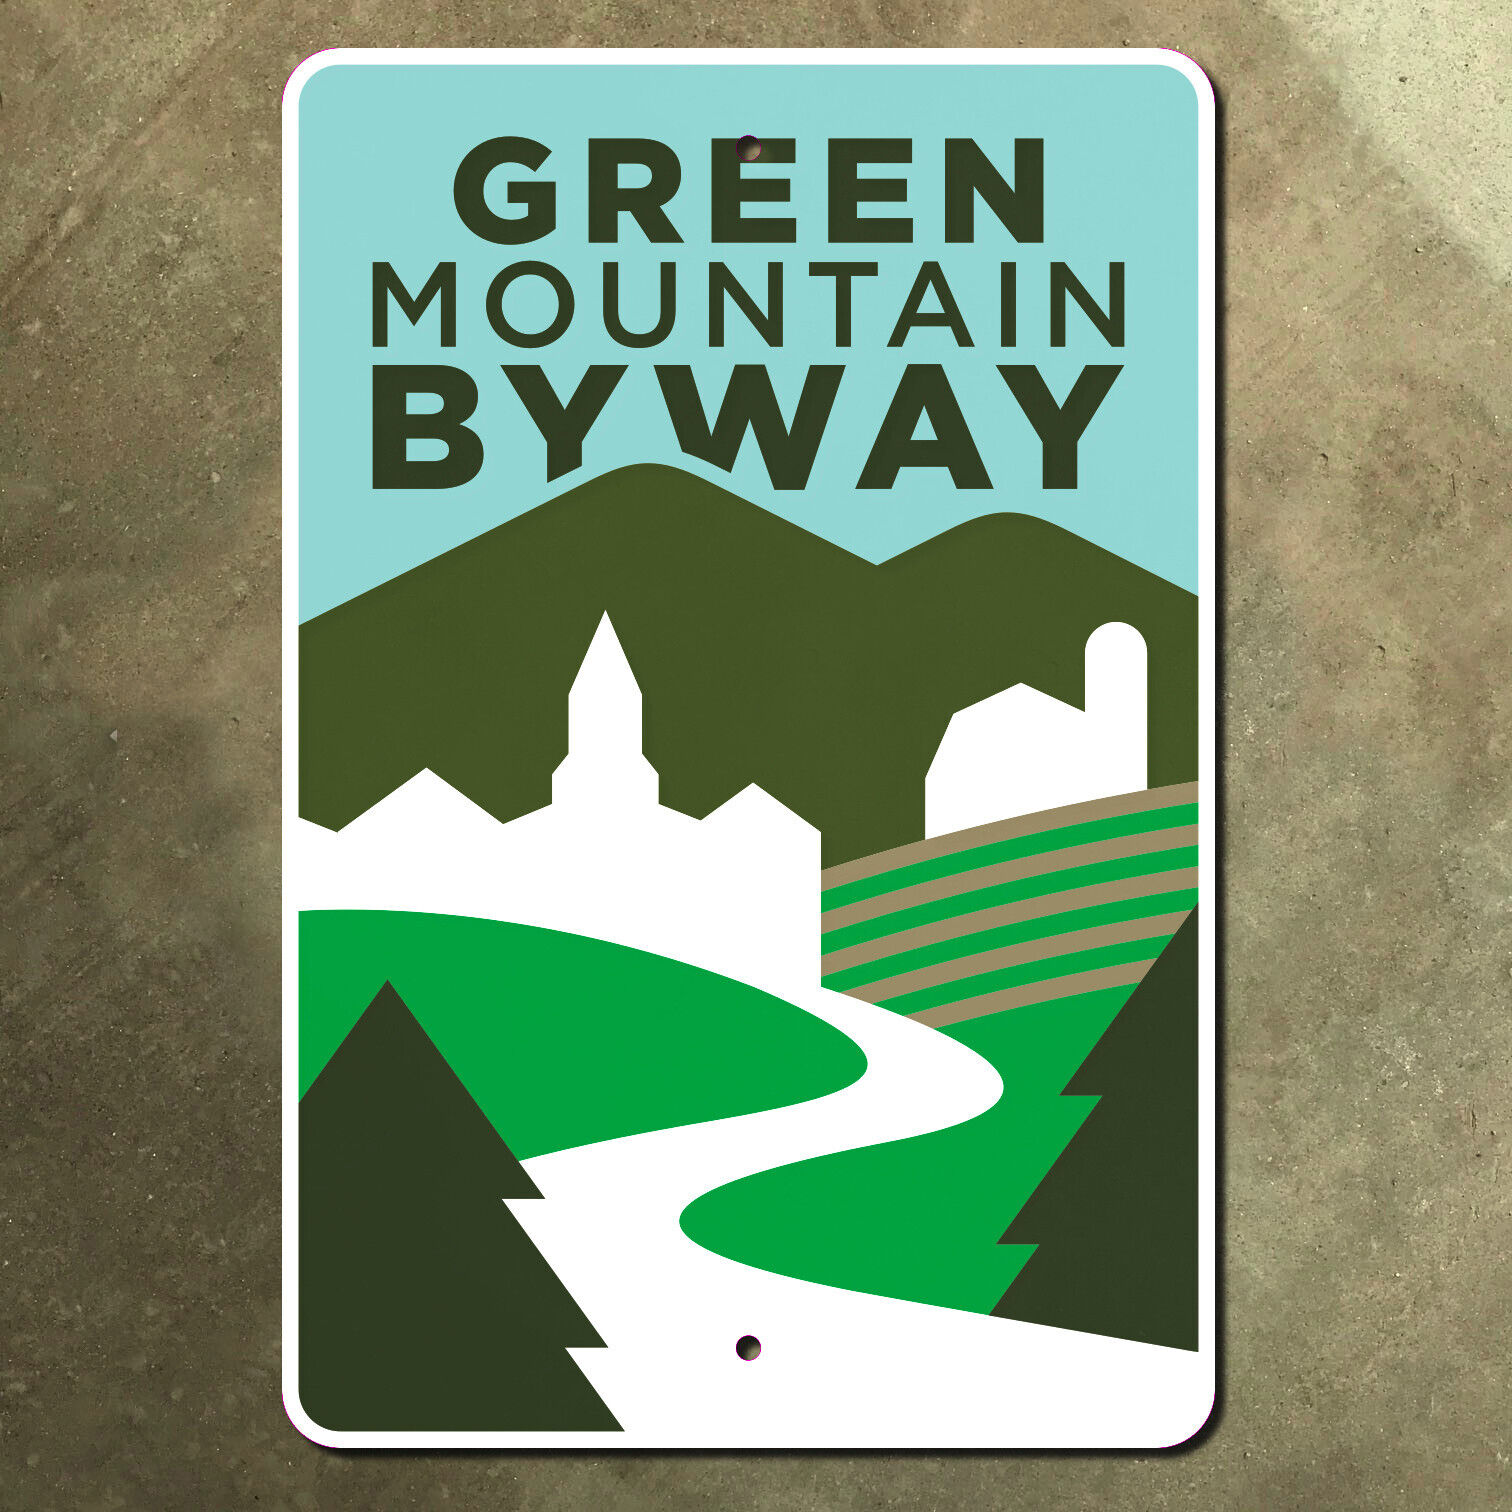 Vermont Green Mountain Byway Waterbury route 100 highway road sign marker 10x15